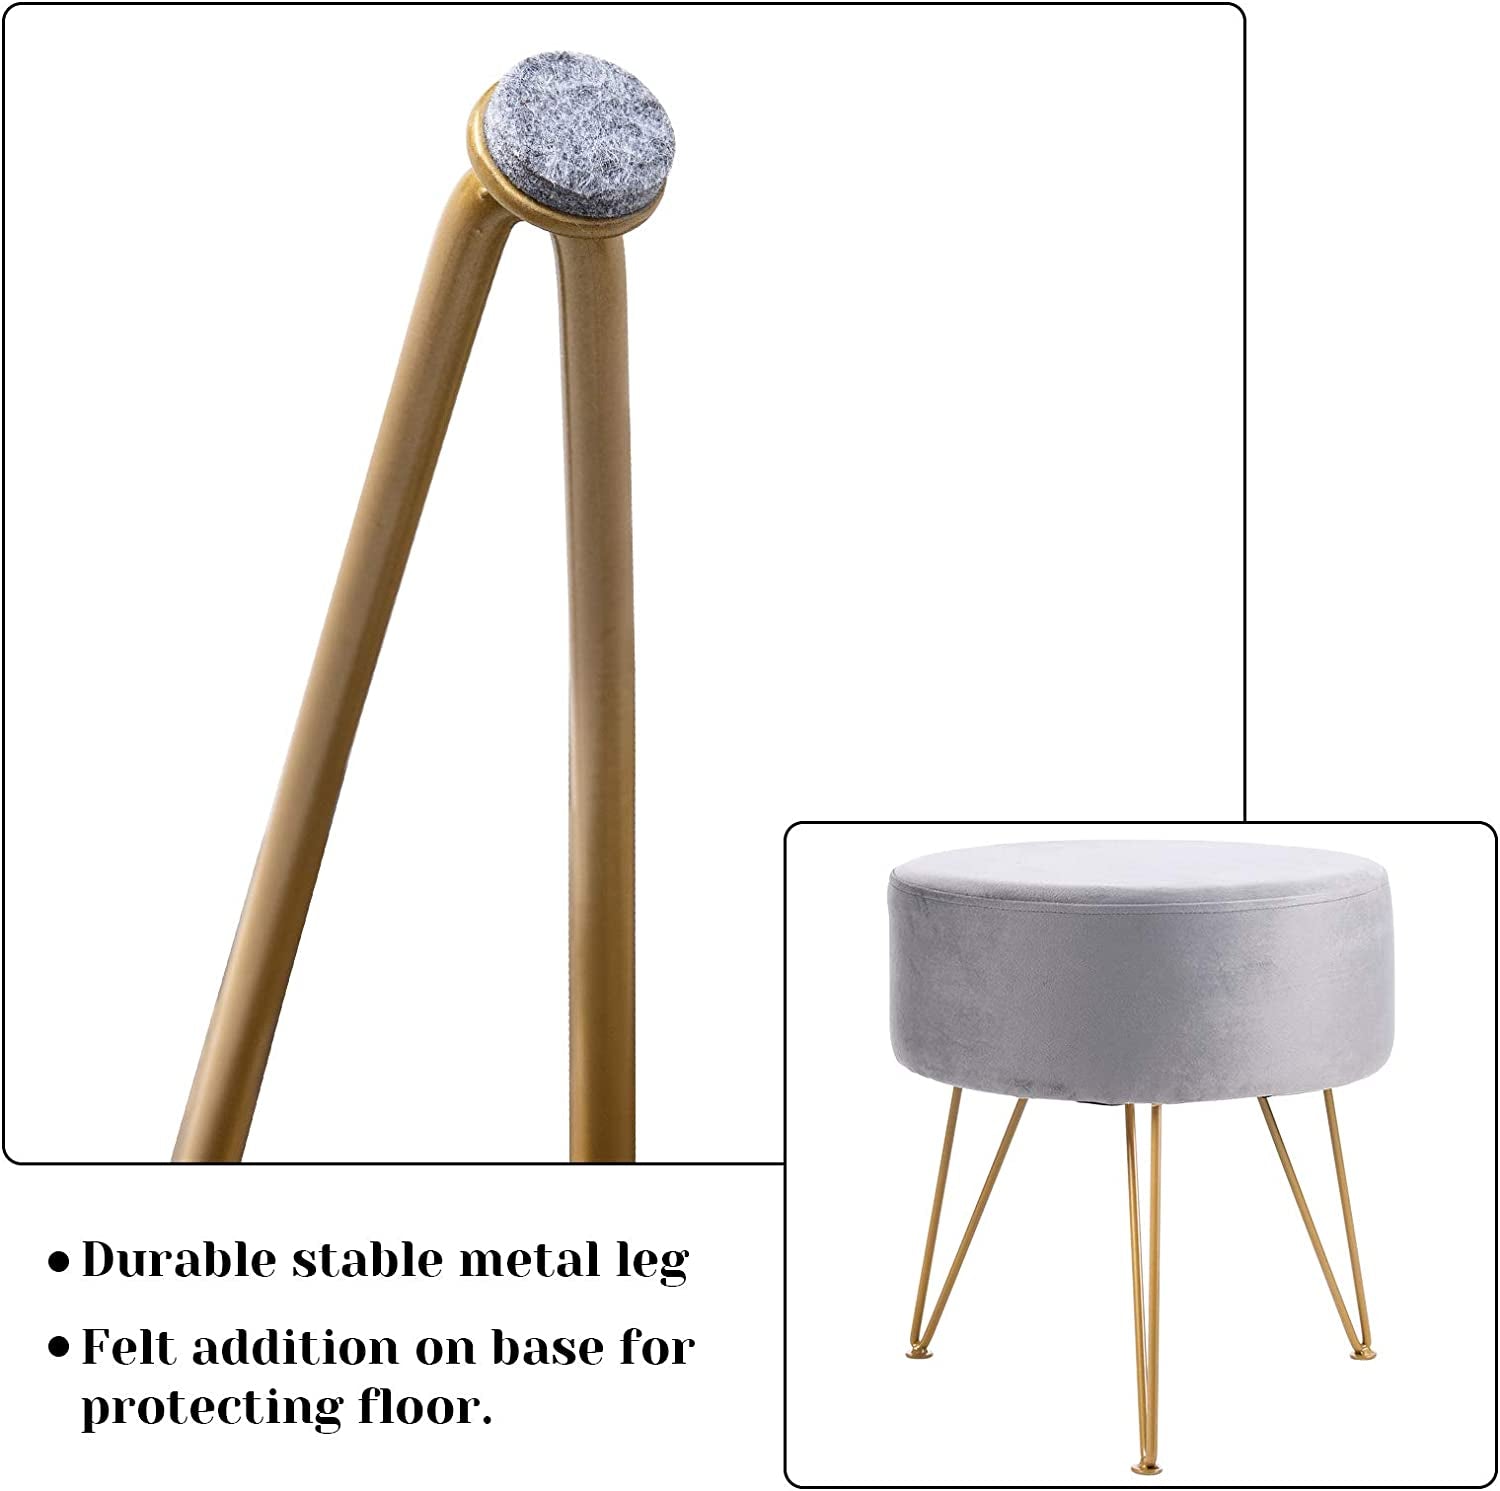 Footstool Velvet round Ottoman Pouffe Stool Dressing Table Stool Metal Legs Removable Cover, for Home Living Room Fitting Room Bedroom Office, Makeup RF-010